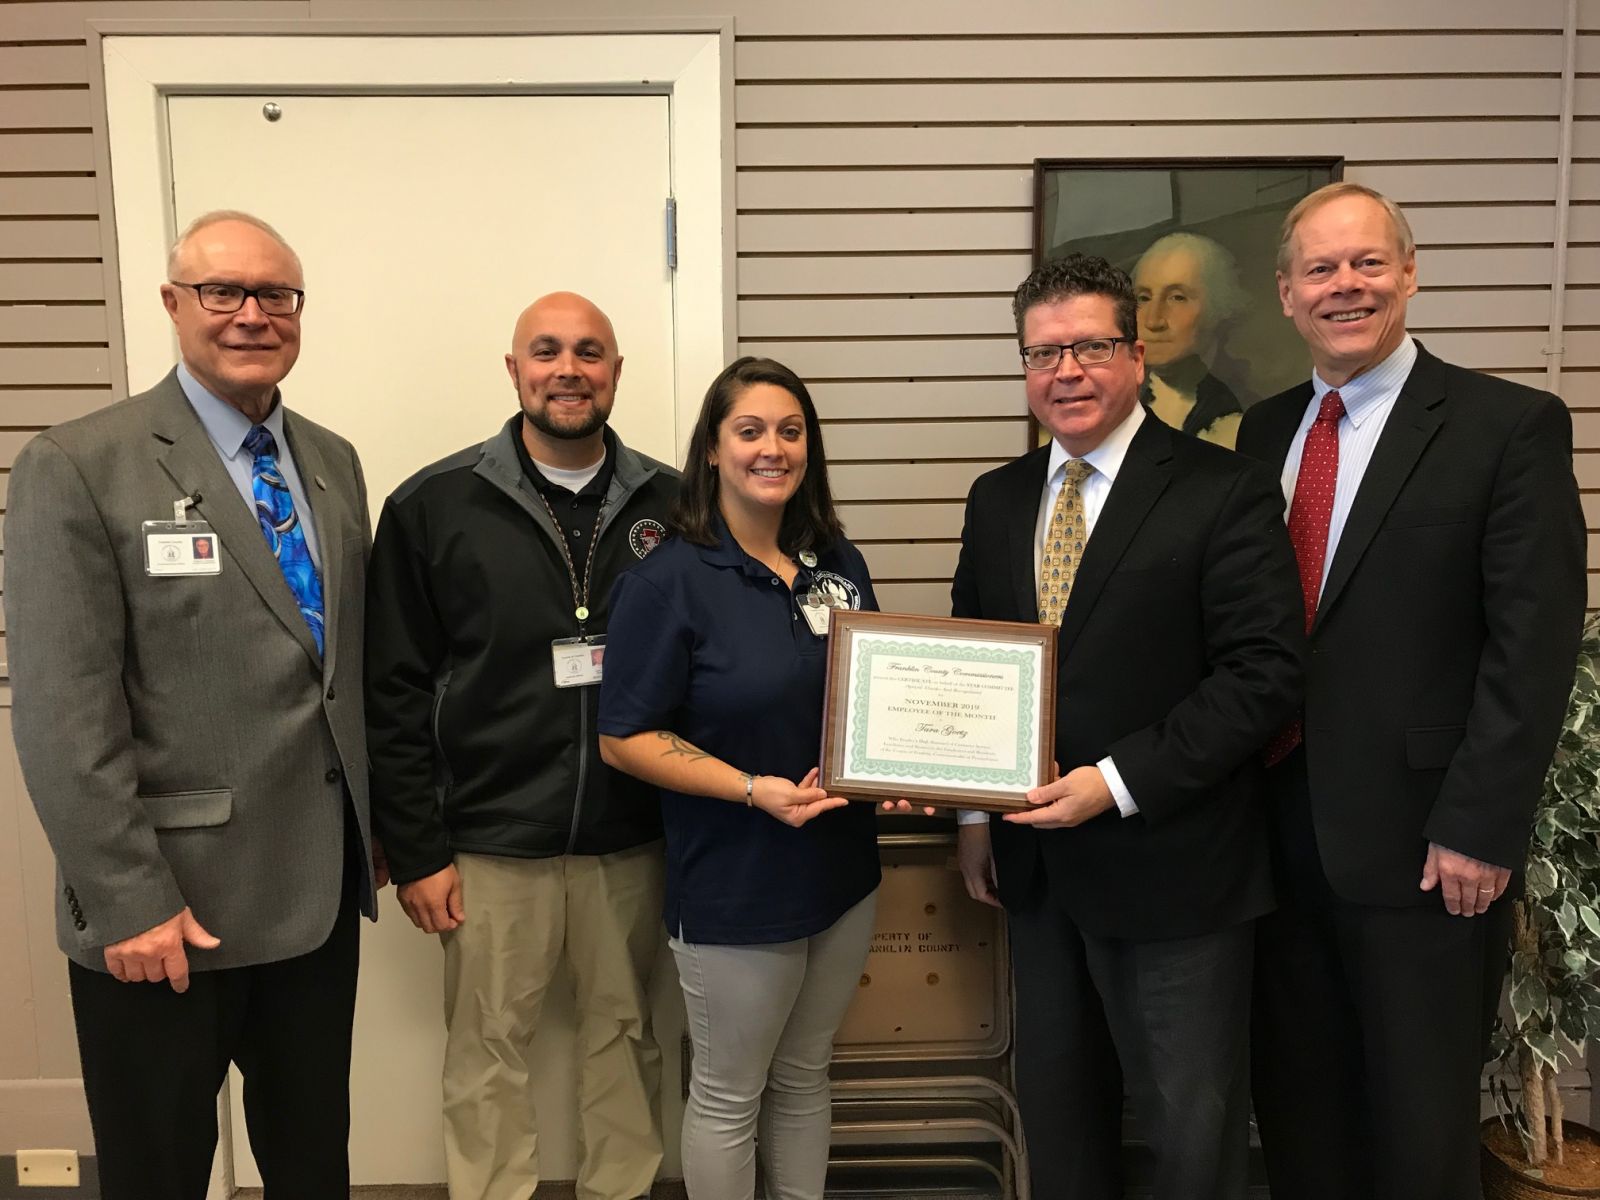 Shown above (left to right): Commissioner Bob Thomas, Director of Veterans Affairs Justin Slep, Veterans Affairs Coordinator Tara Goetz, Commissioner Chairman Dave Keller, Commissioner Bob Ziobrowski